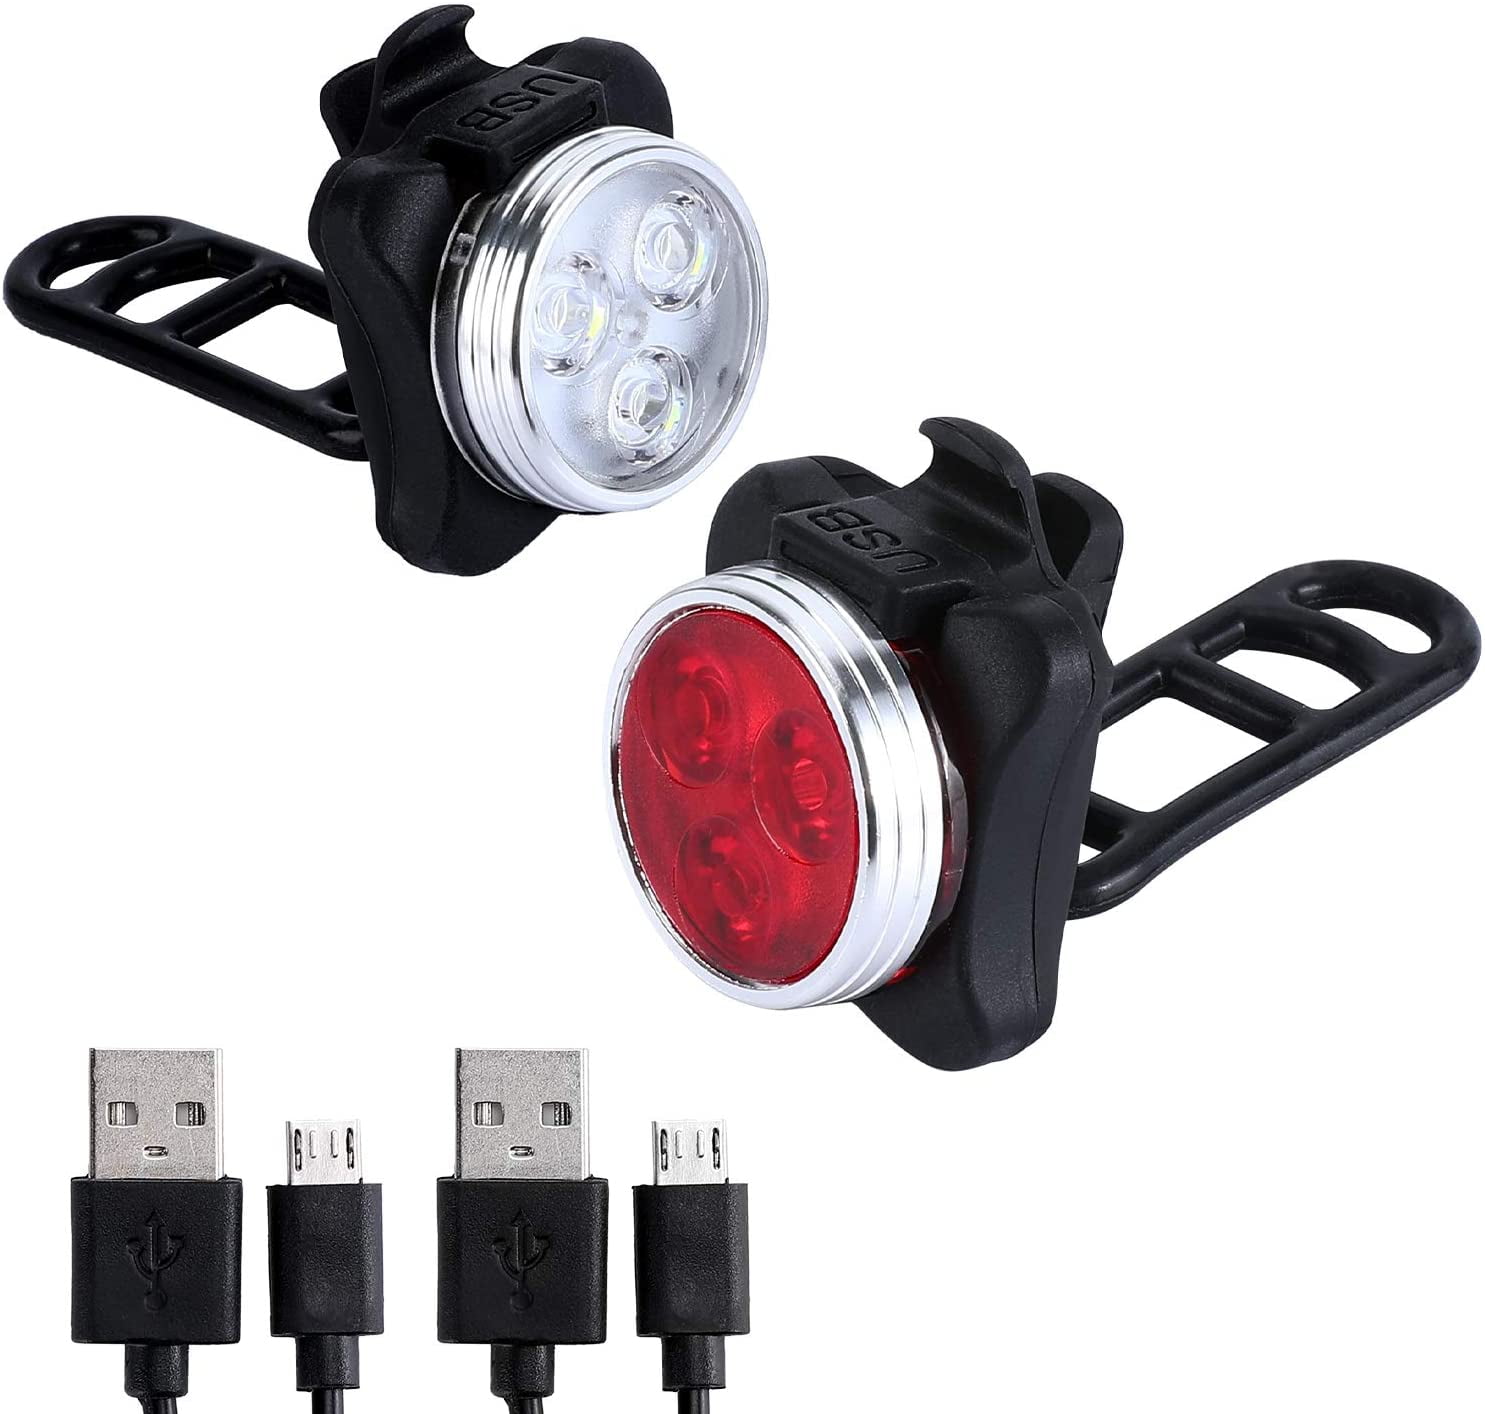 Rechargeable USB LED Bike Bicycle Head Tail Cycling Front Rear Headlight Set